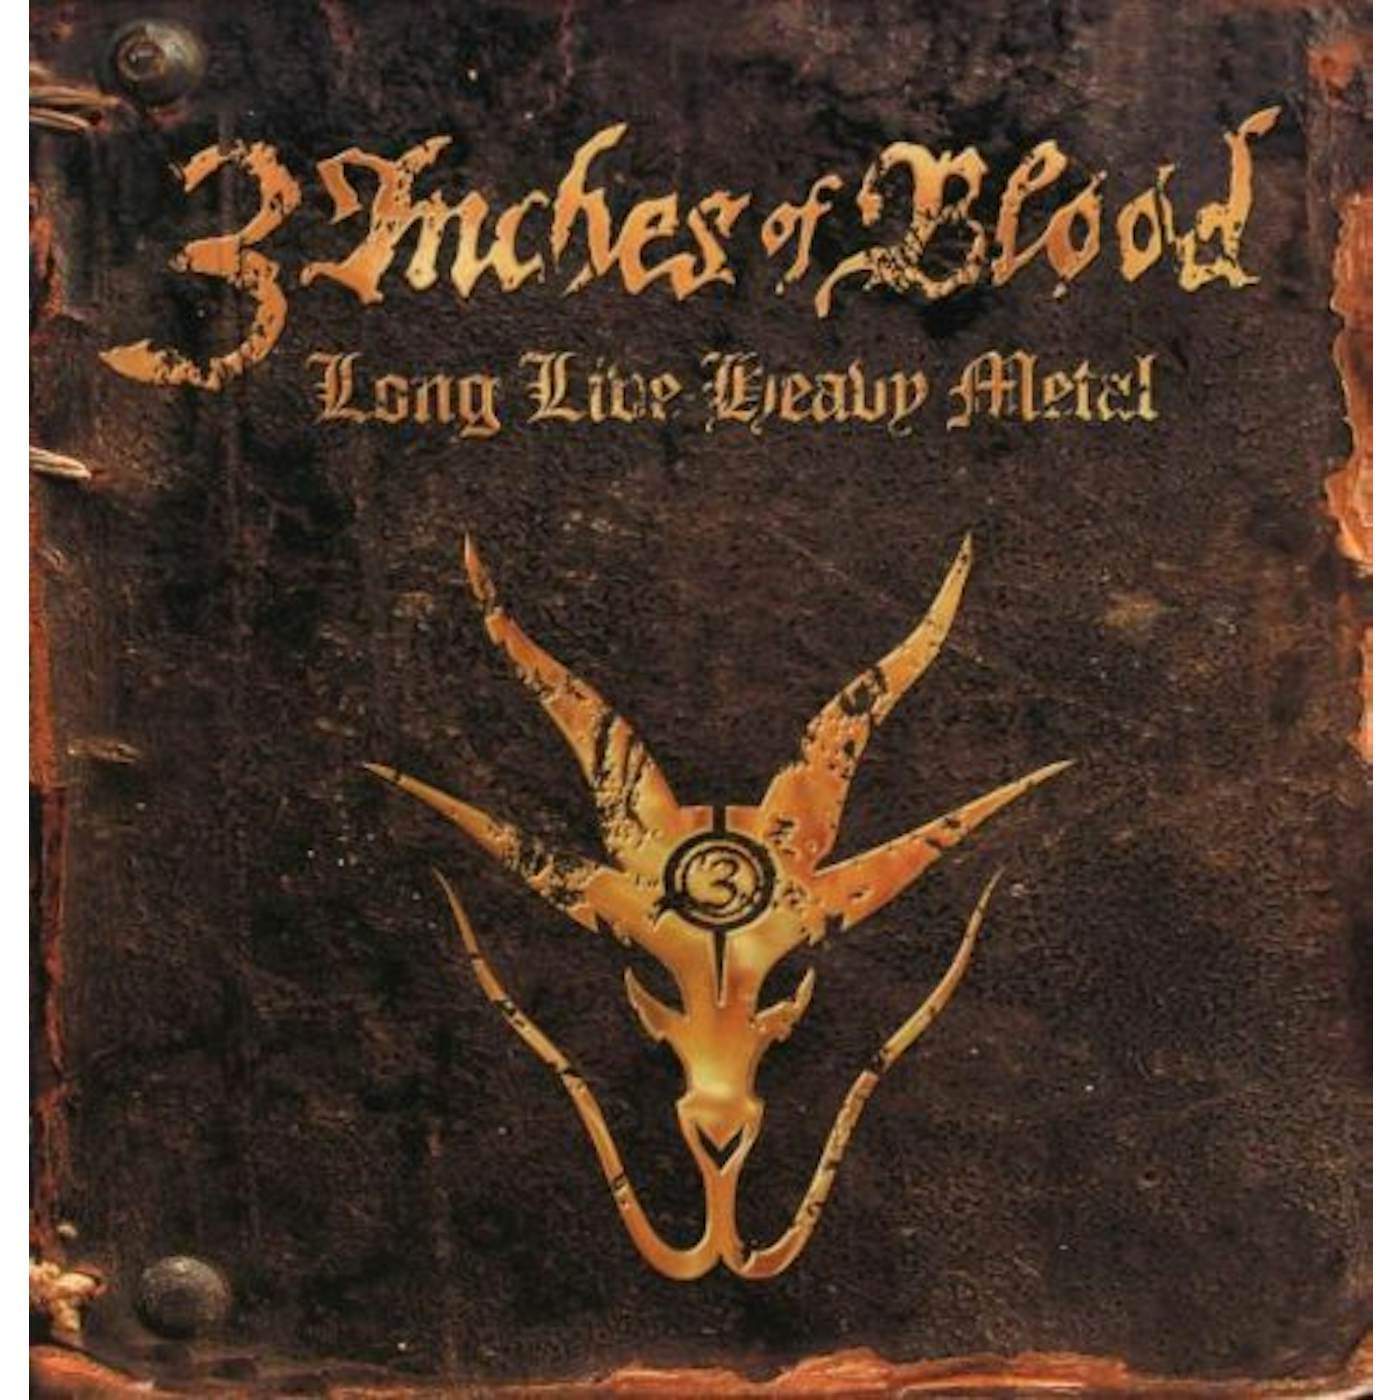 3 Inches Of Blood LONG LIVE HEAVY METAL (GER) Vinyl Record